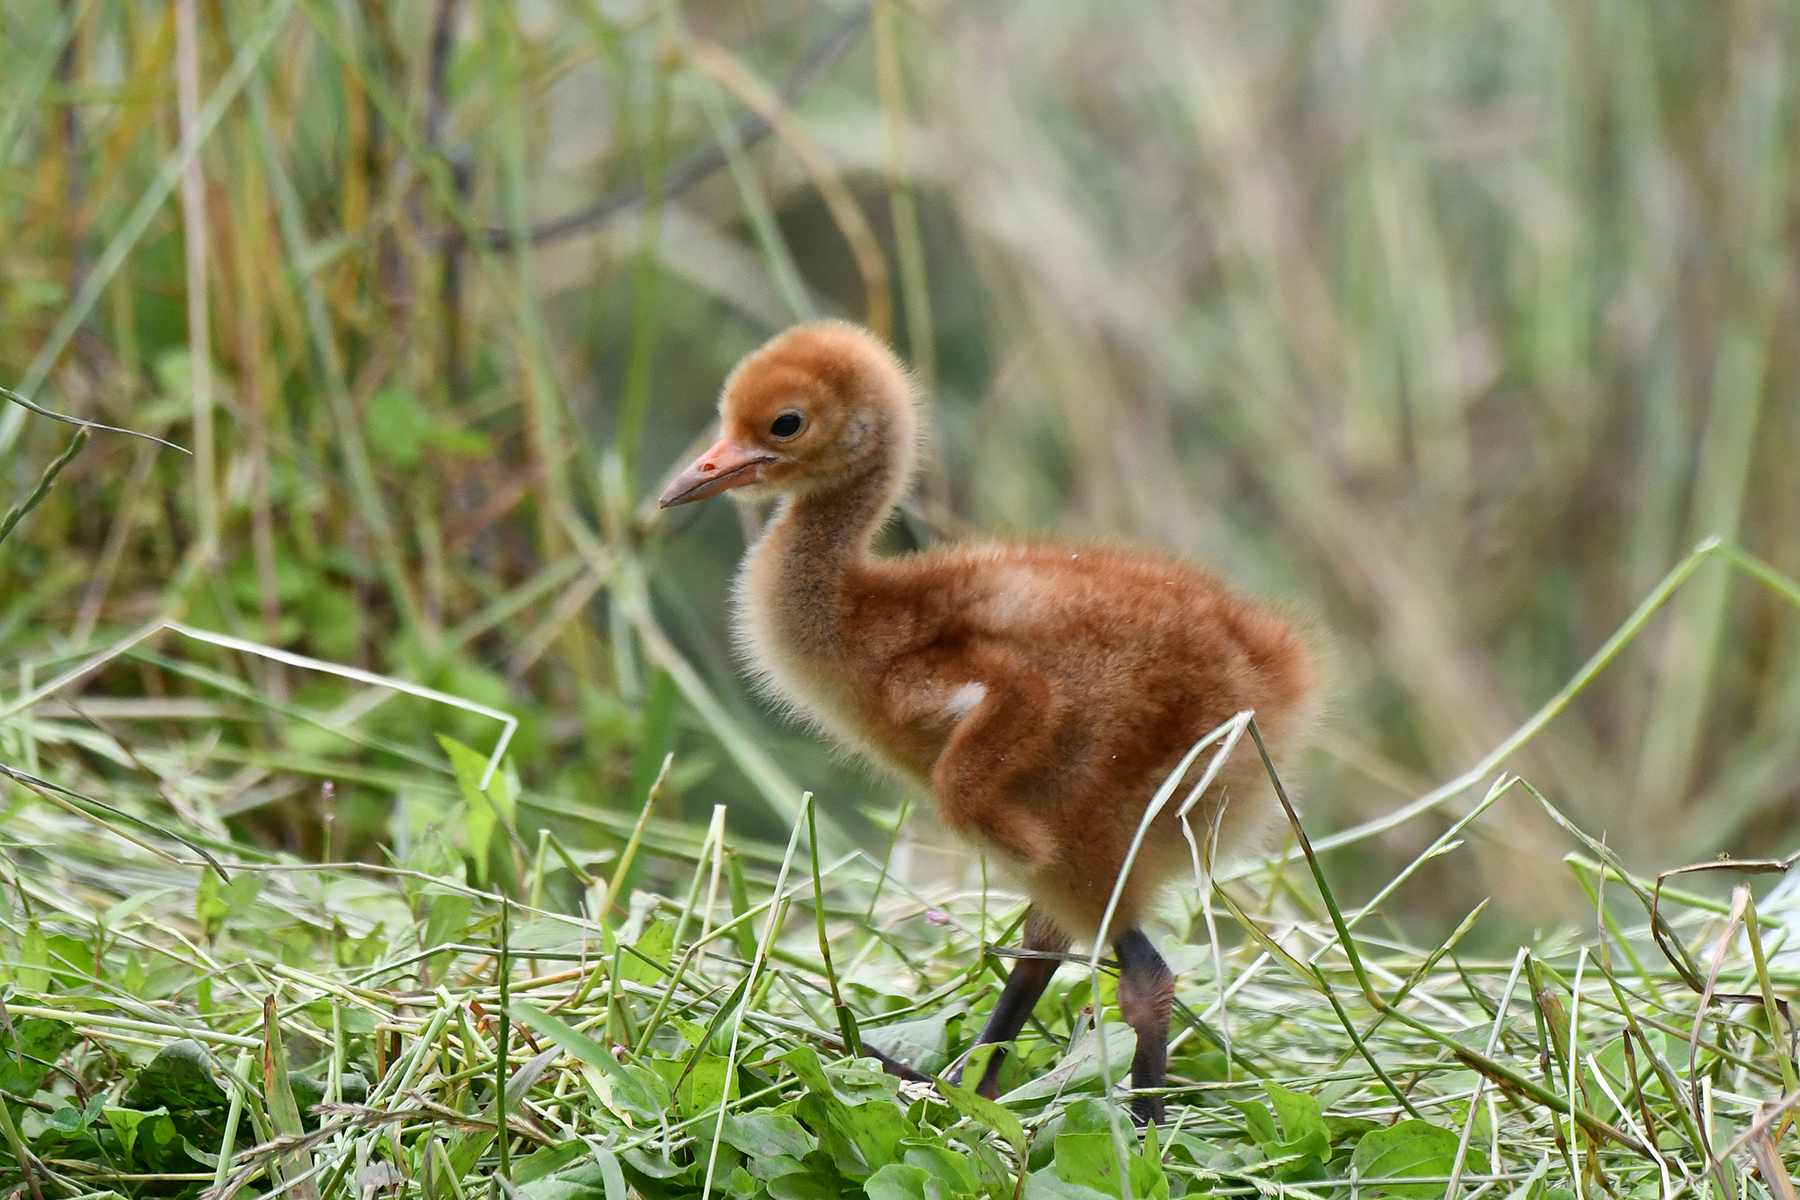 A whooping crane chick strolls through the grasses in its habitat.